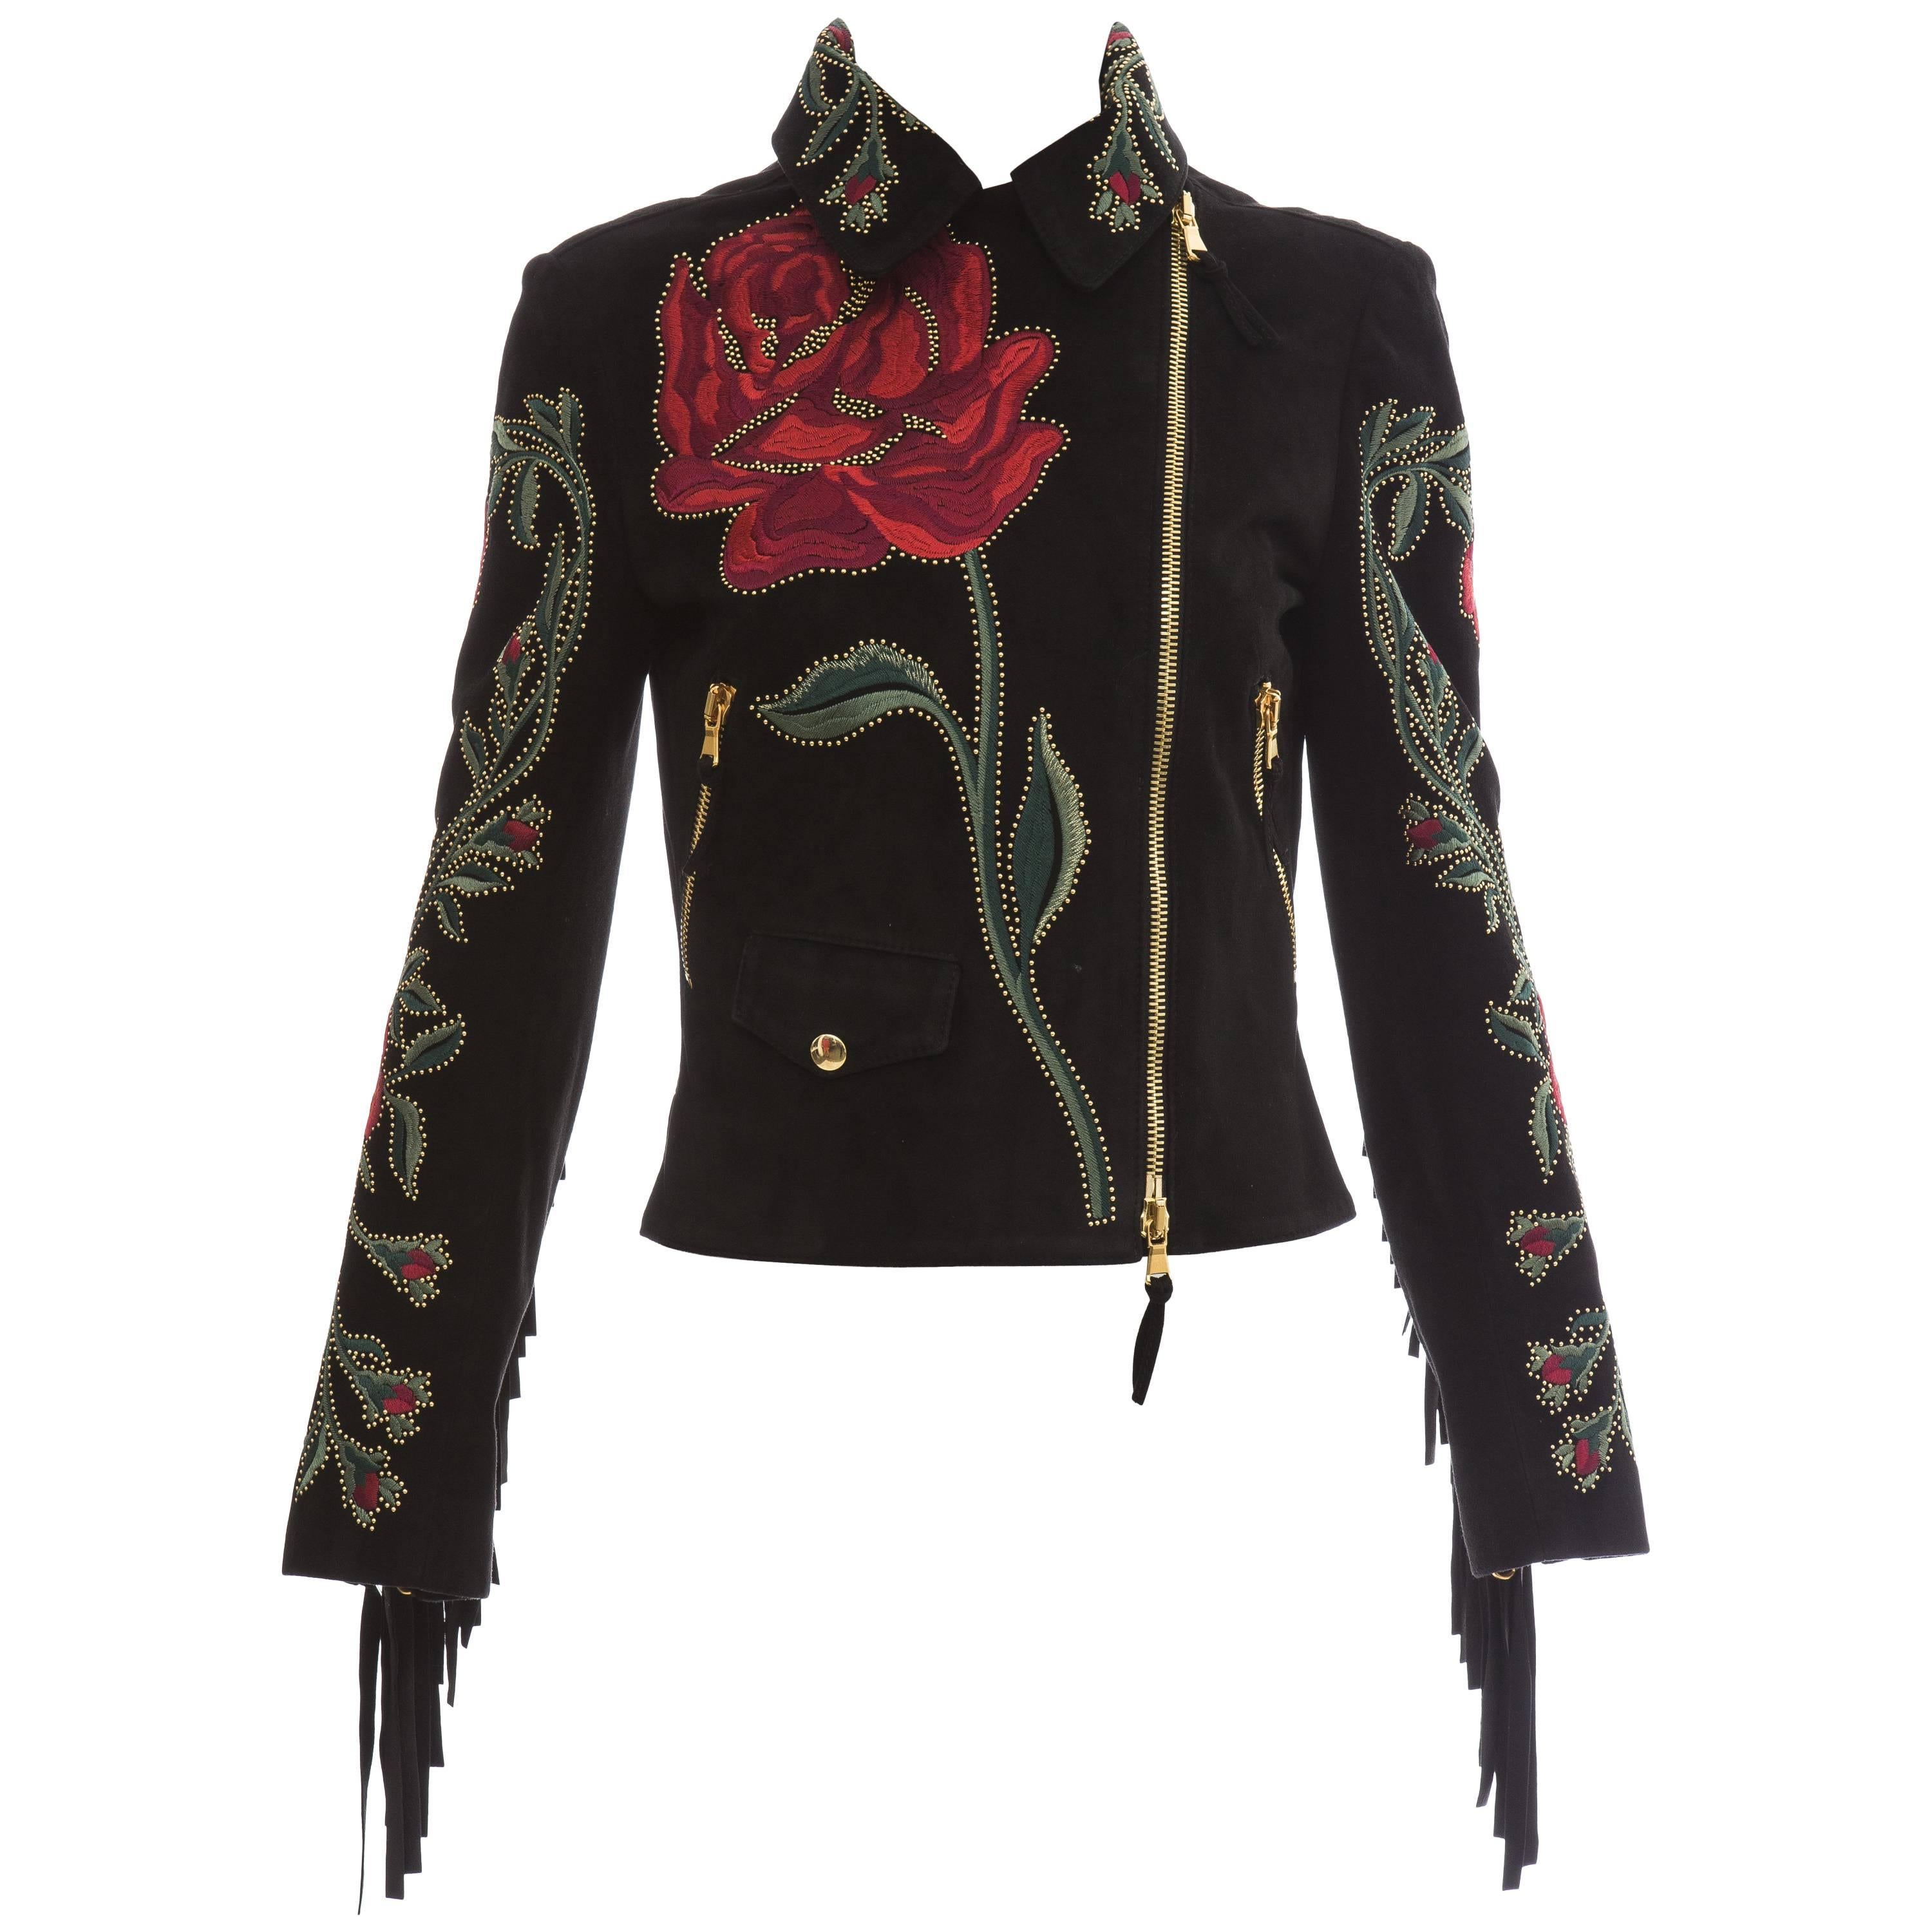 Moschino Black Suede Gold Stud Embroidered Jacket With Fringe Trim, Fall 2013